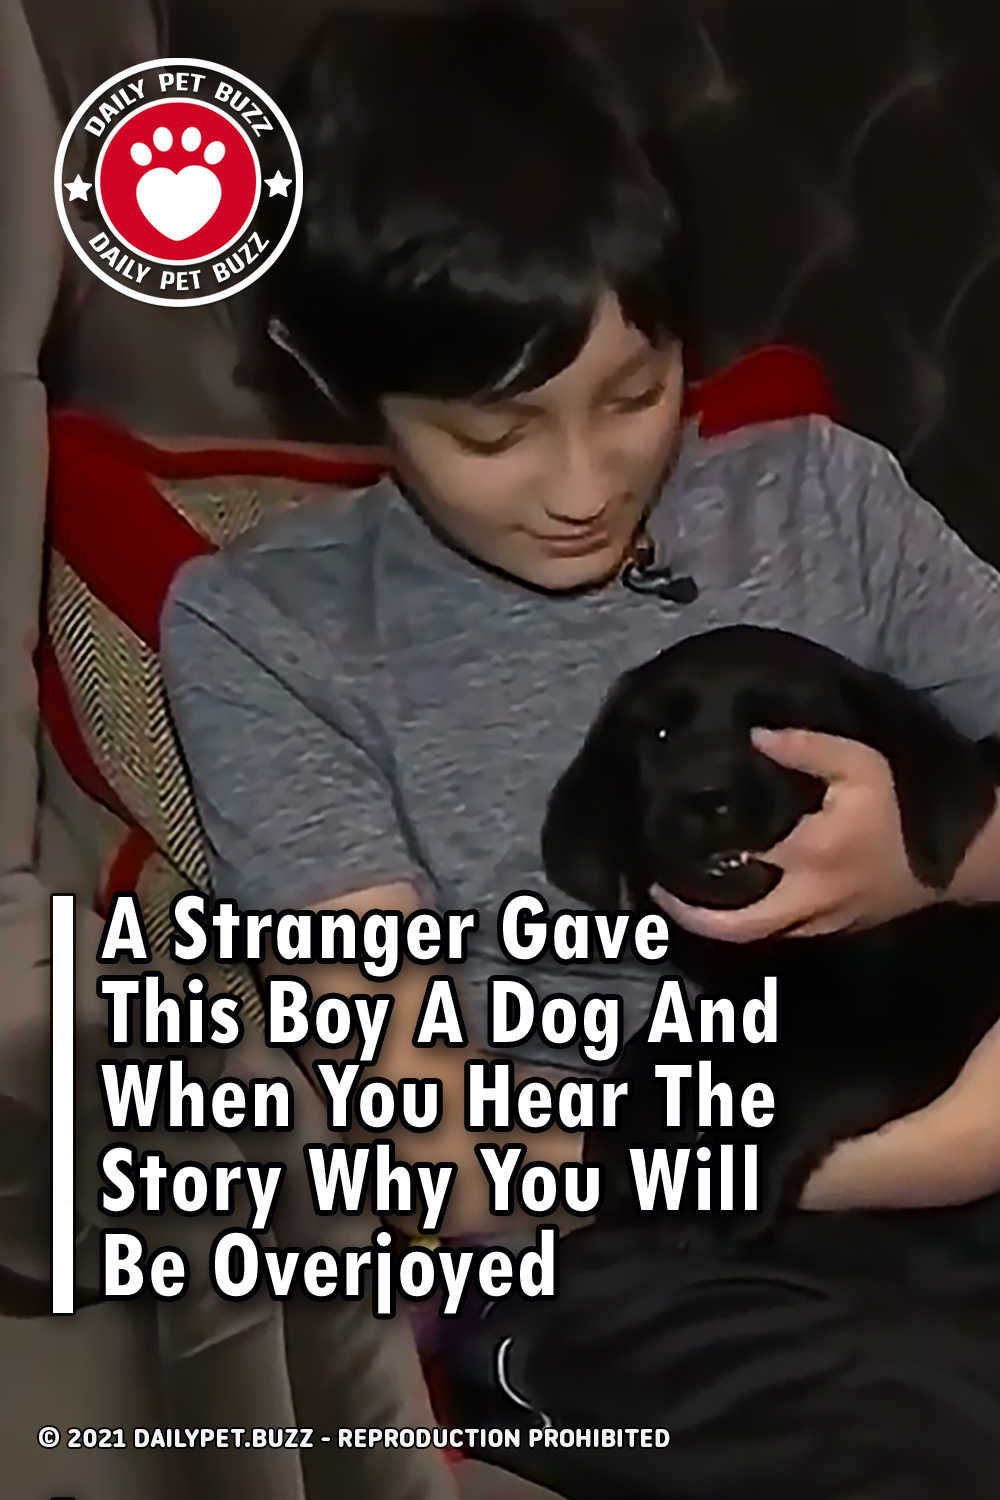 A Stranger Gave This Boy A Dog And When You Hear The Story Why You Will Be Overjoyed